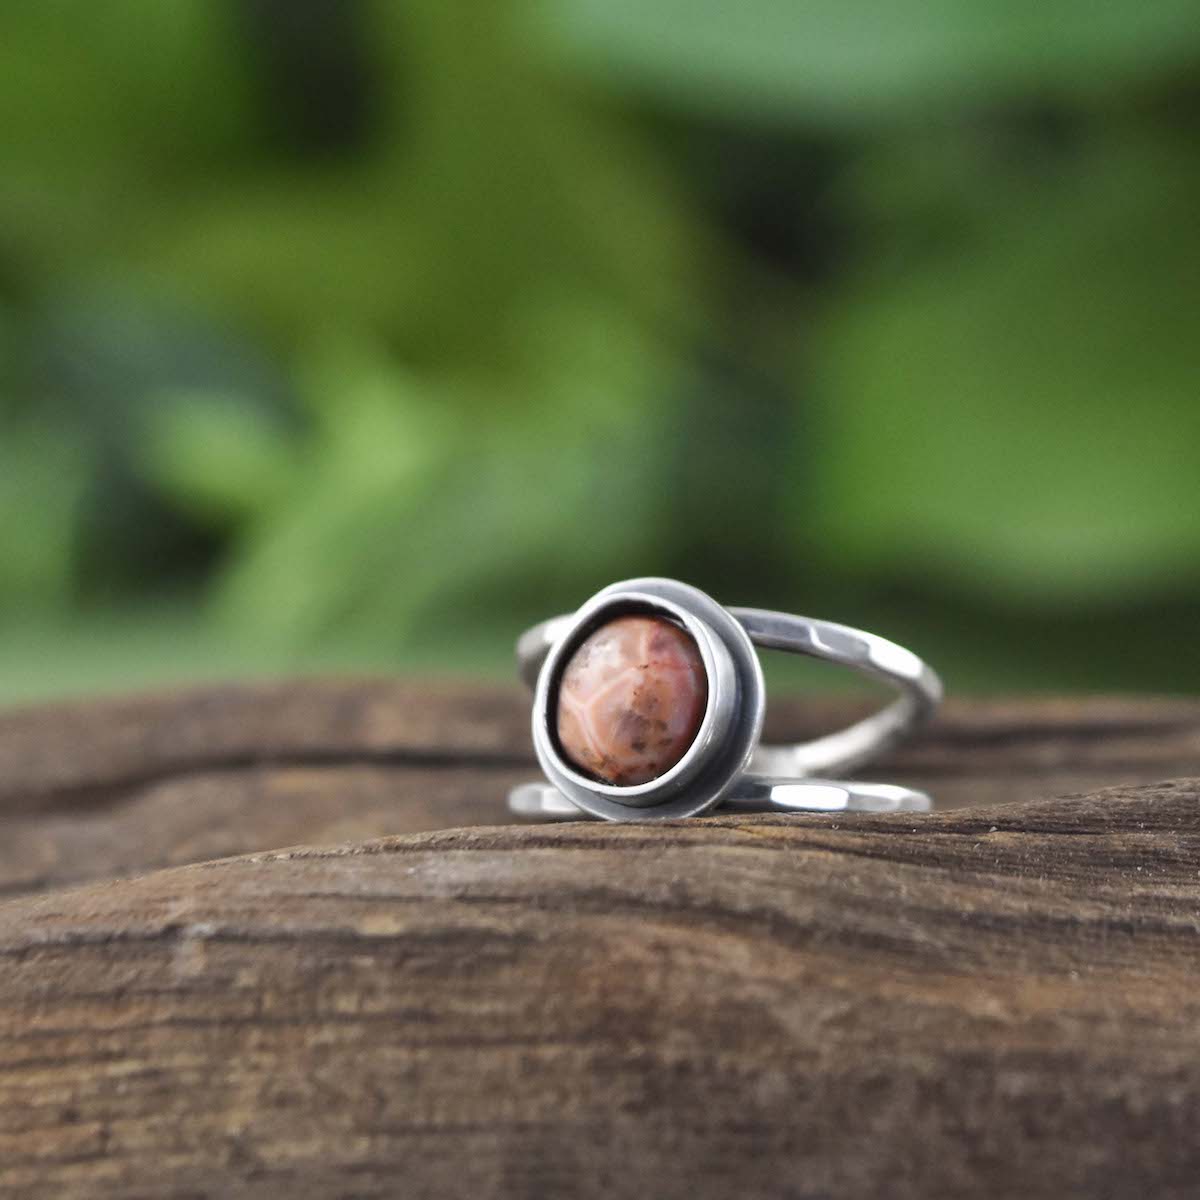 Thomsonite Ring - Choose Your Own Stone - Ring  A. / U.P. Thomsonite  B. 9 x 11mm / U.P. Thomsonite 3004 - handmade by Beth Millner Jewelry